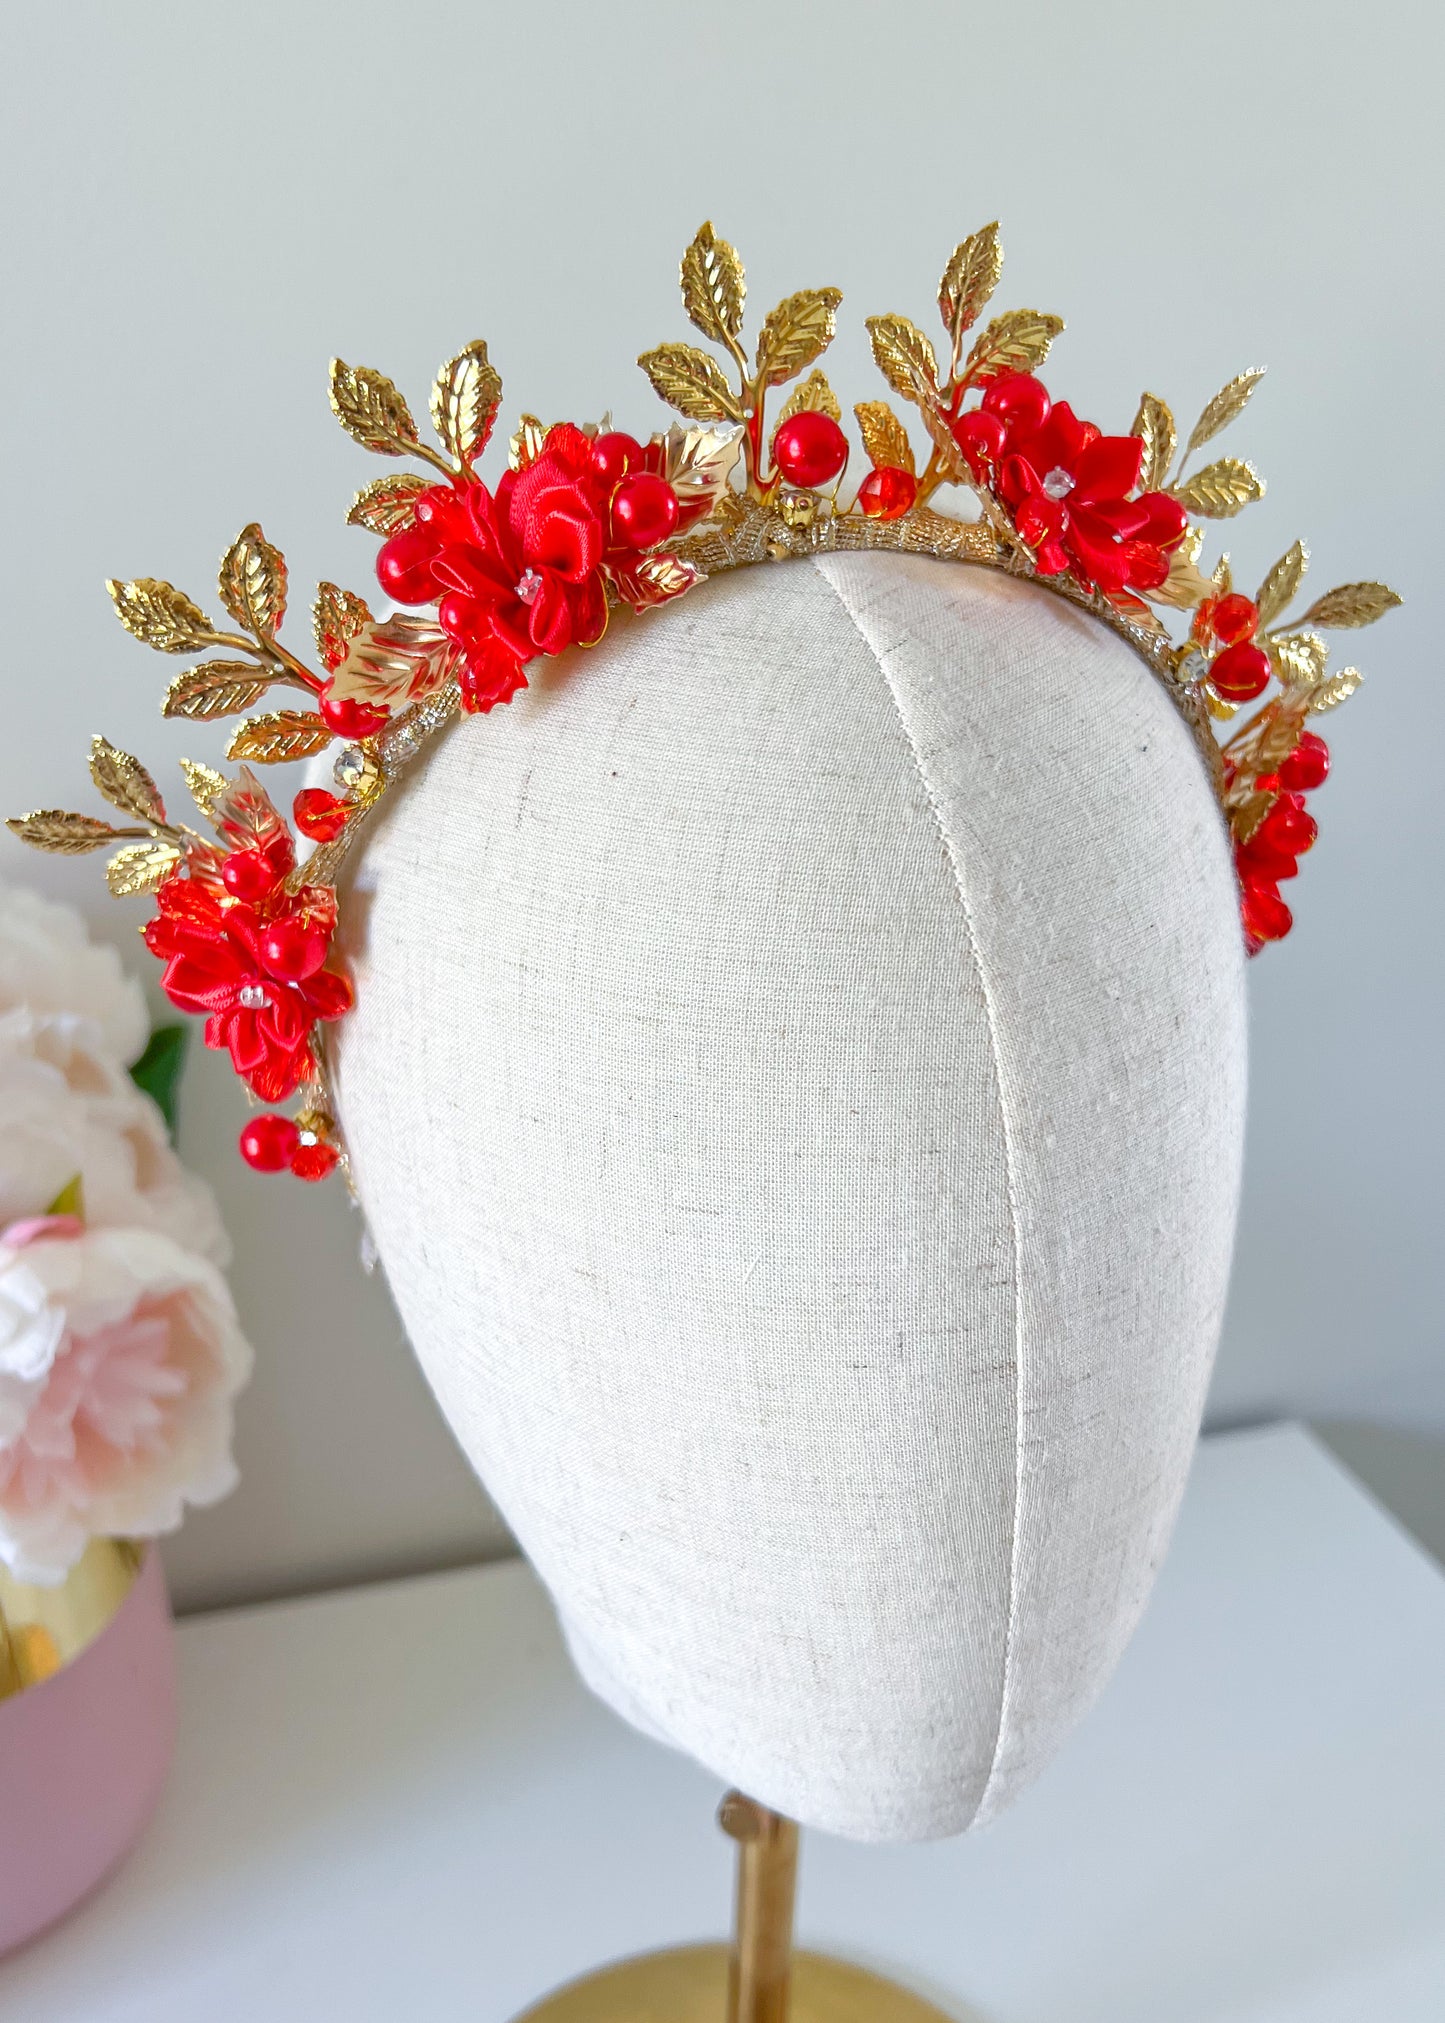 "Sloan" Red & Gold Crown